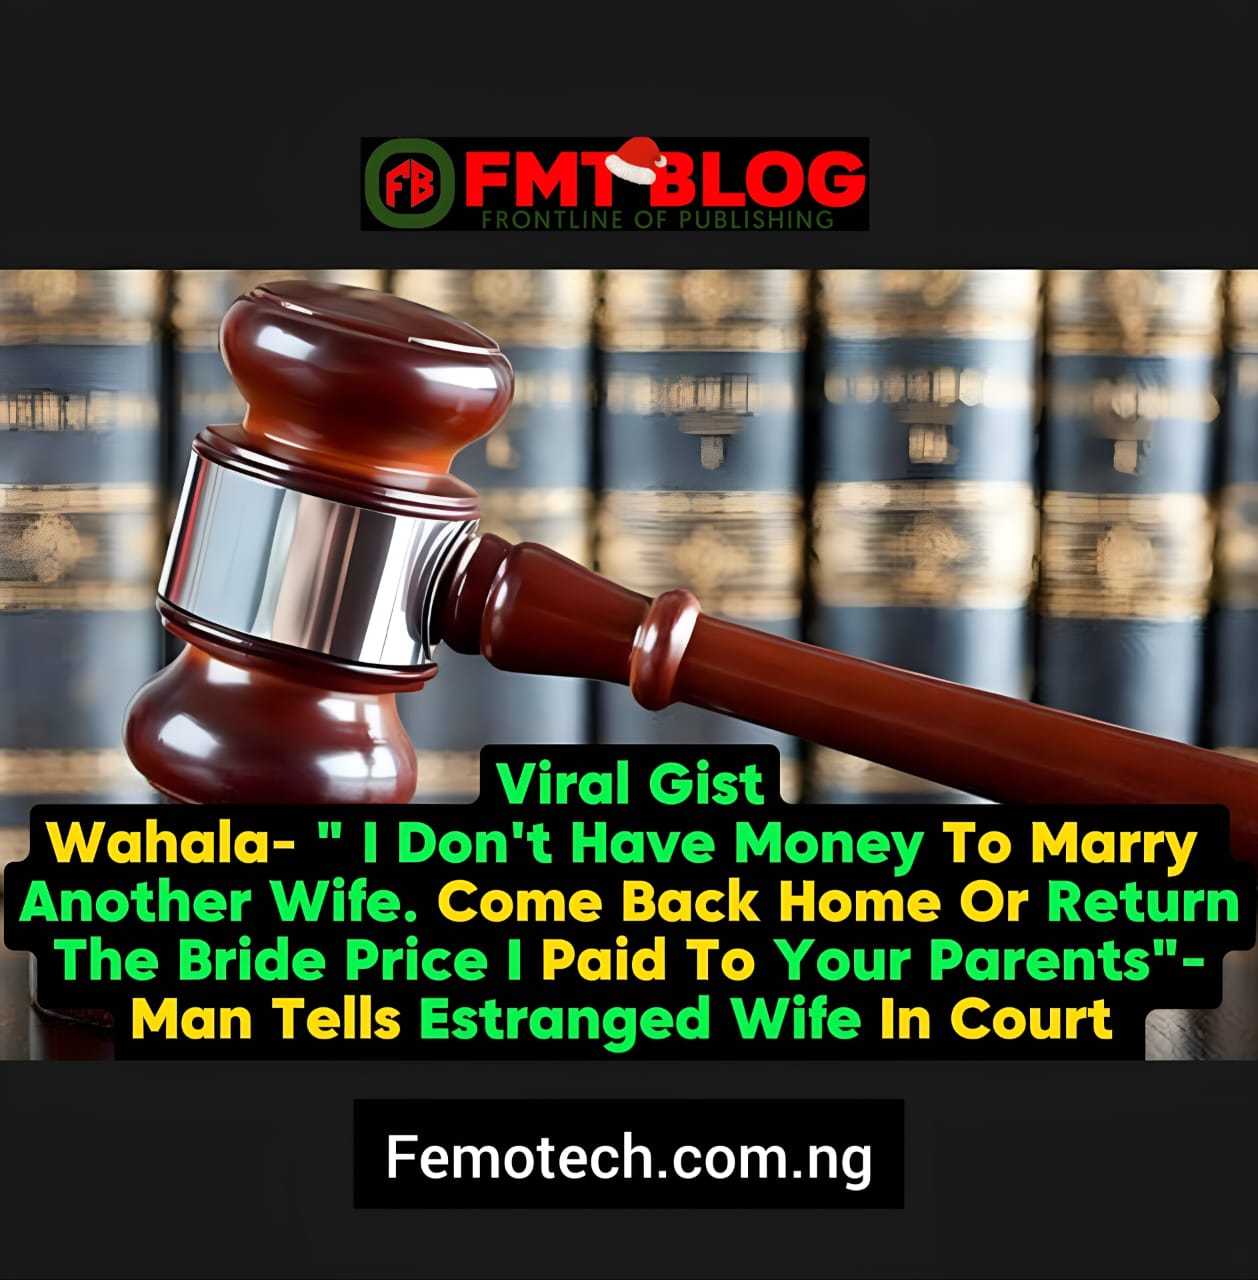 Wahala- ”I Don’t Have Money To Marry Another Wife. Come Back Home Or Return The Bride Price I Paid To Your Parents”- Man Tells Estranged Wife In Court